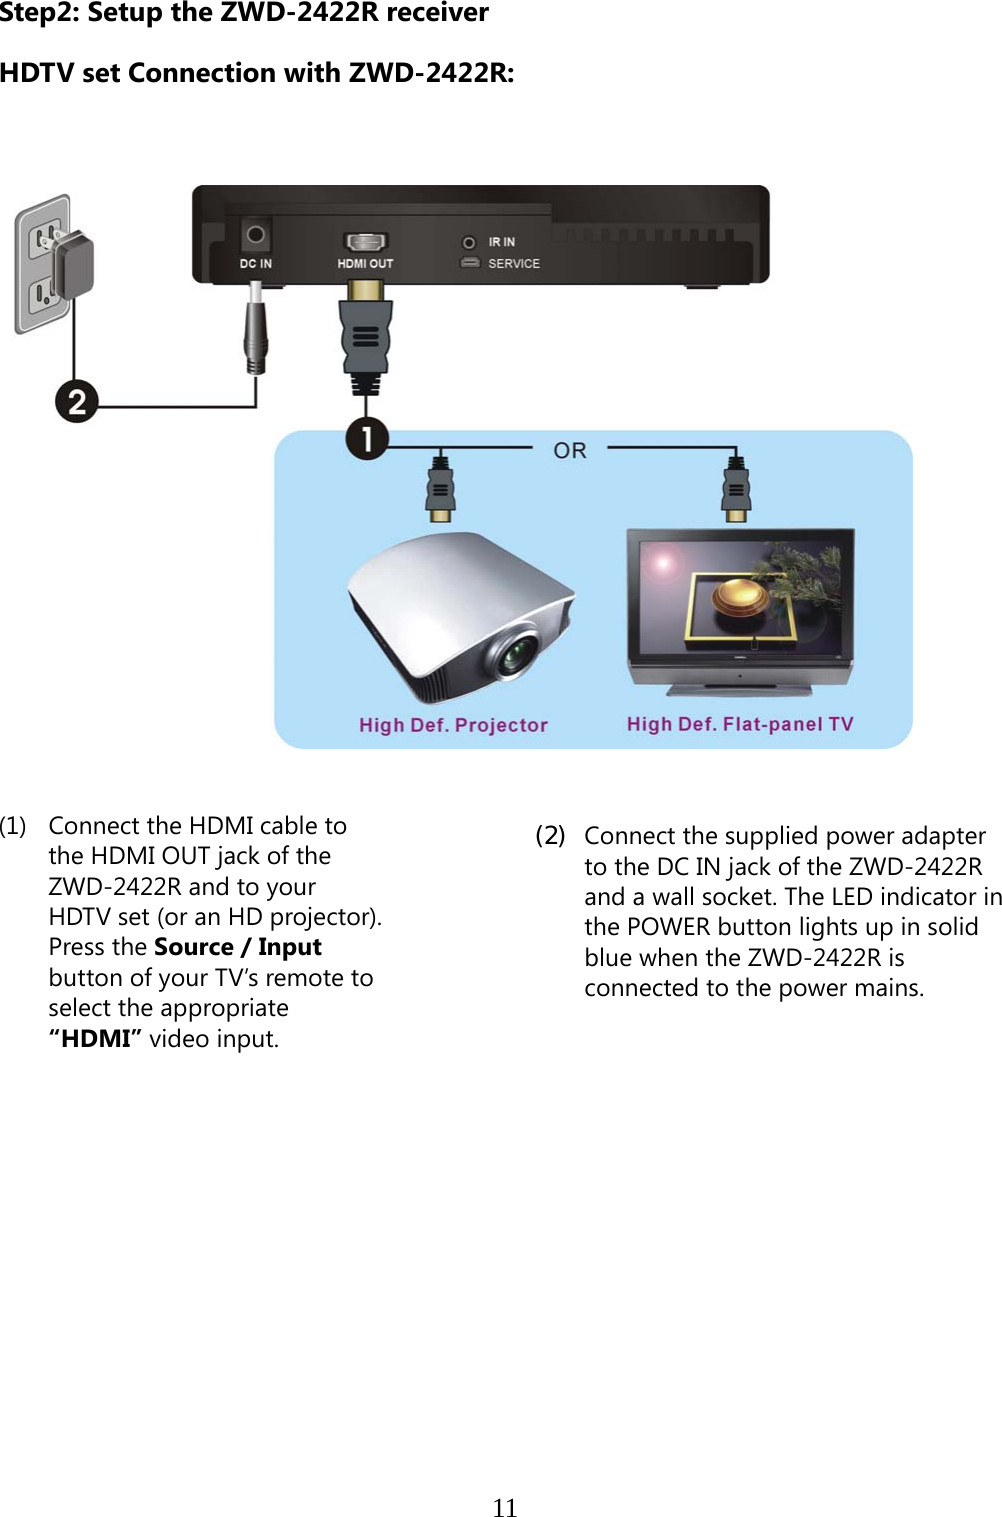    11Step2: Setup the ZWD-2422R receiver  HDTV set Connection with ZWD-2422R:      (1)  Connect the HDMI cable to the HDMI OUT jack of the ZWD-2422R and to your HDTV set (or an HD projector).   Press the Source / Input button of your TV’s remote to select the appropriate “HDMI” video input.                            (2)  Connect the supplied power adapter to the DC IN jack of the ZWD-2422R and a wall socket. The LED indicator in the POWER button lights up in solid blue when the ZWD-2422R is connected to the power mains.   